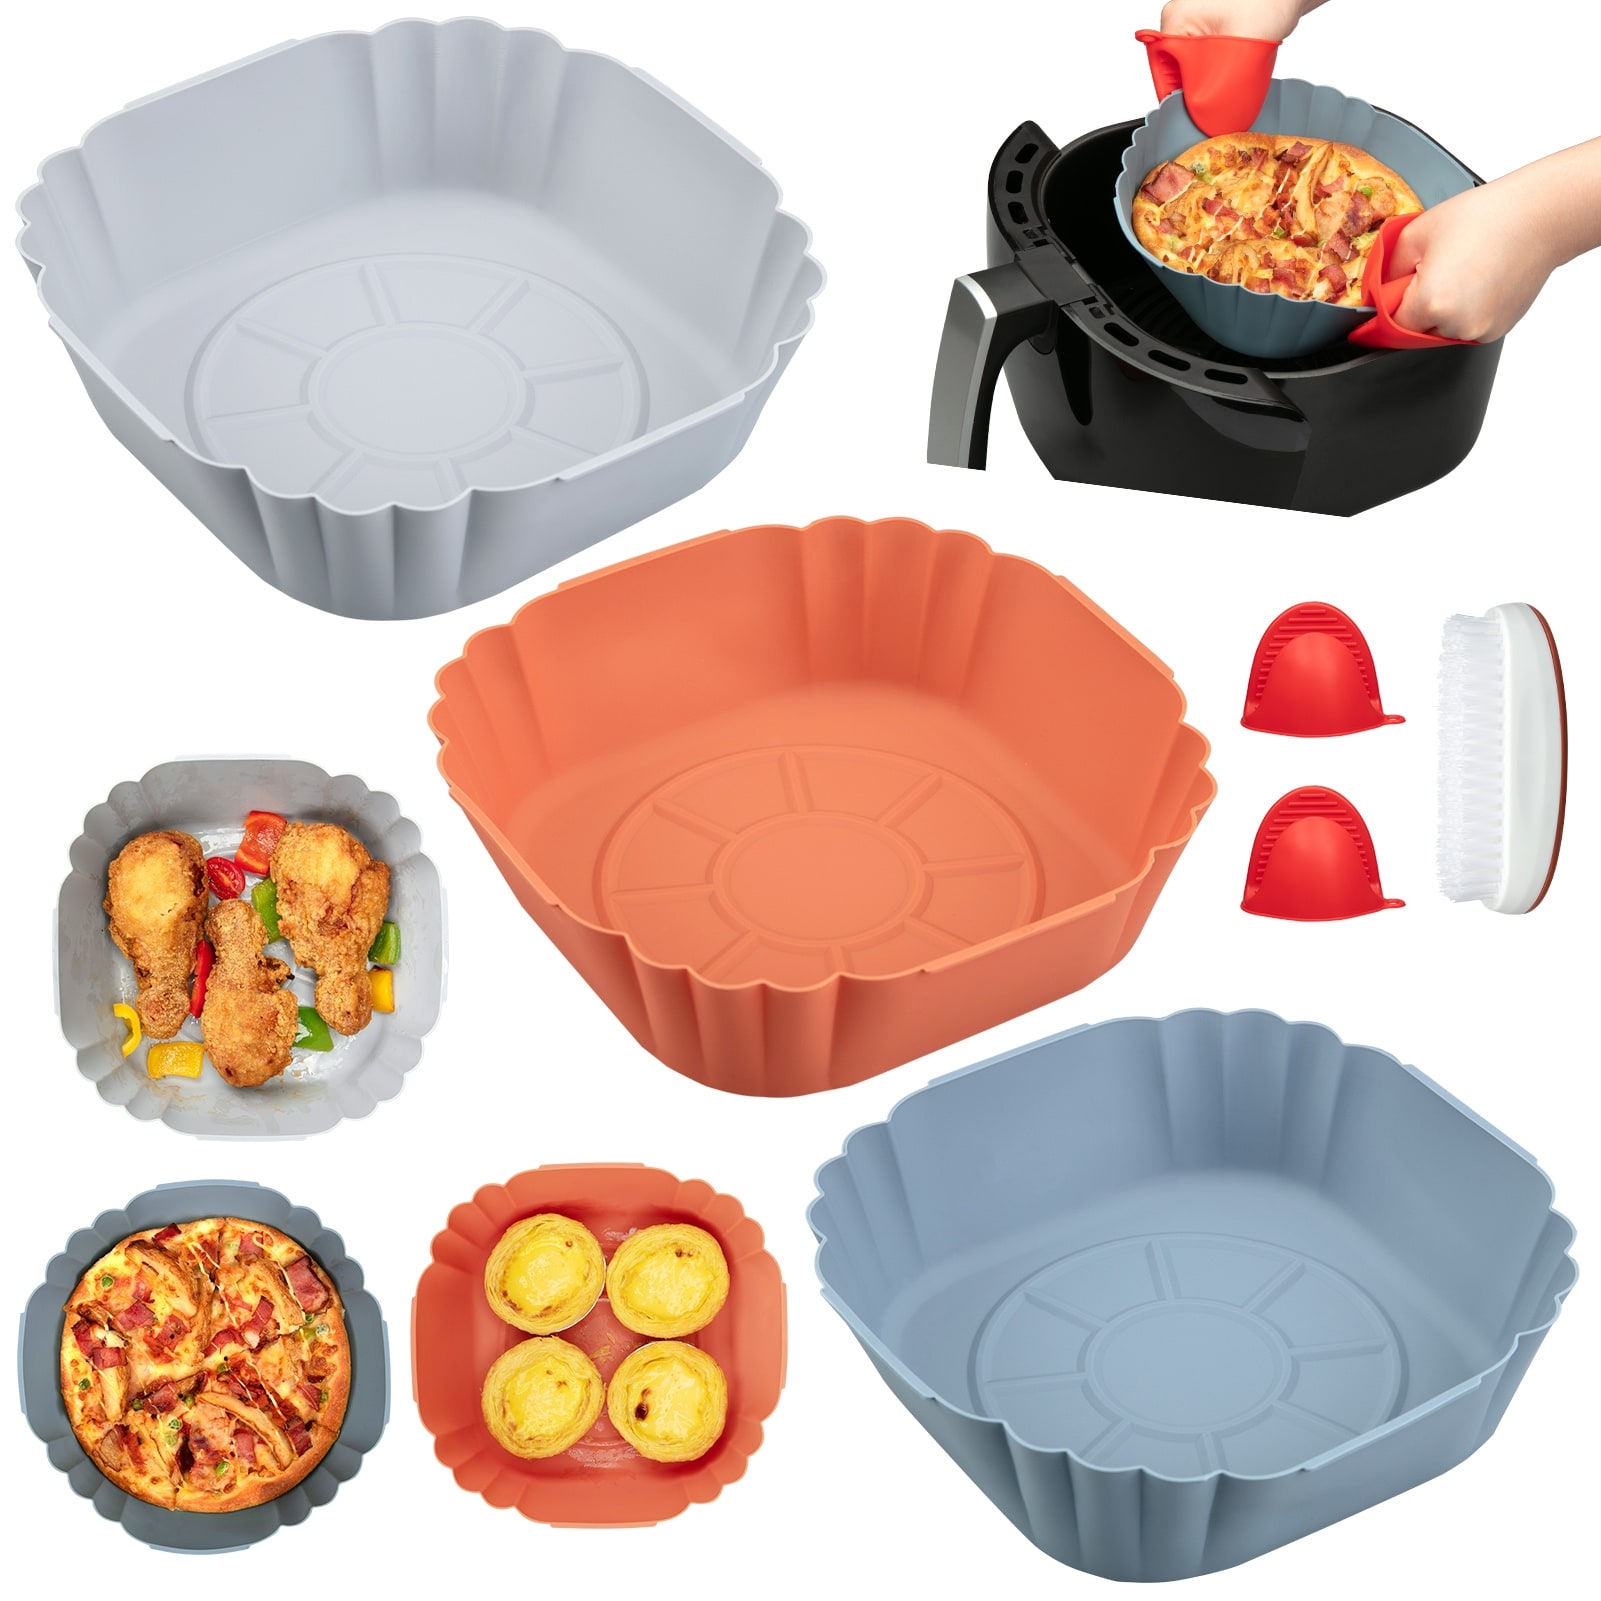 https://ak1.ostkcdn.com/images/products/is/images/direct/53ea5892fbed6ccc94beaa88b478bed23eeb10f9/6pcs-silicone-baking-pan-set-for-air-cooker%2C-red%2Bgrey%2Bblue.jpg